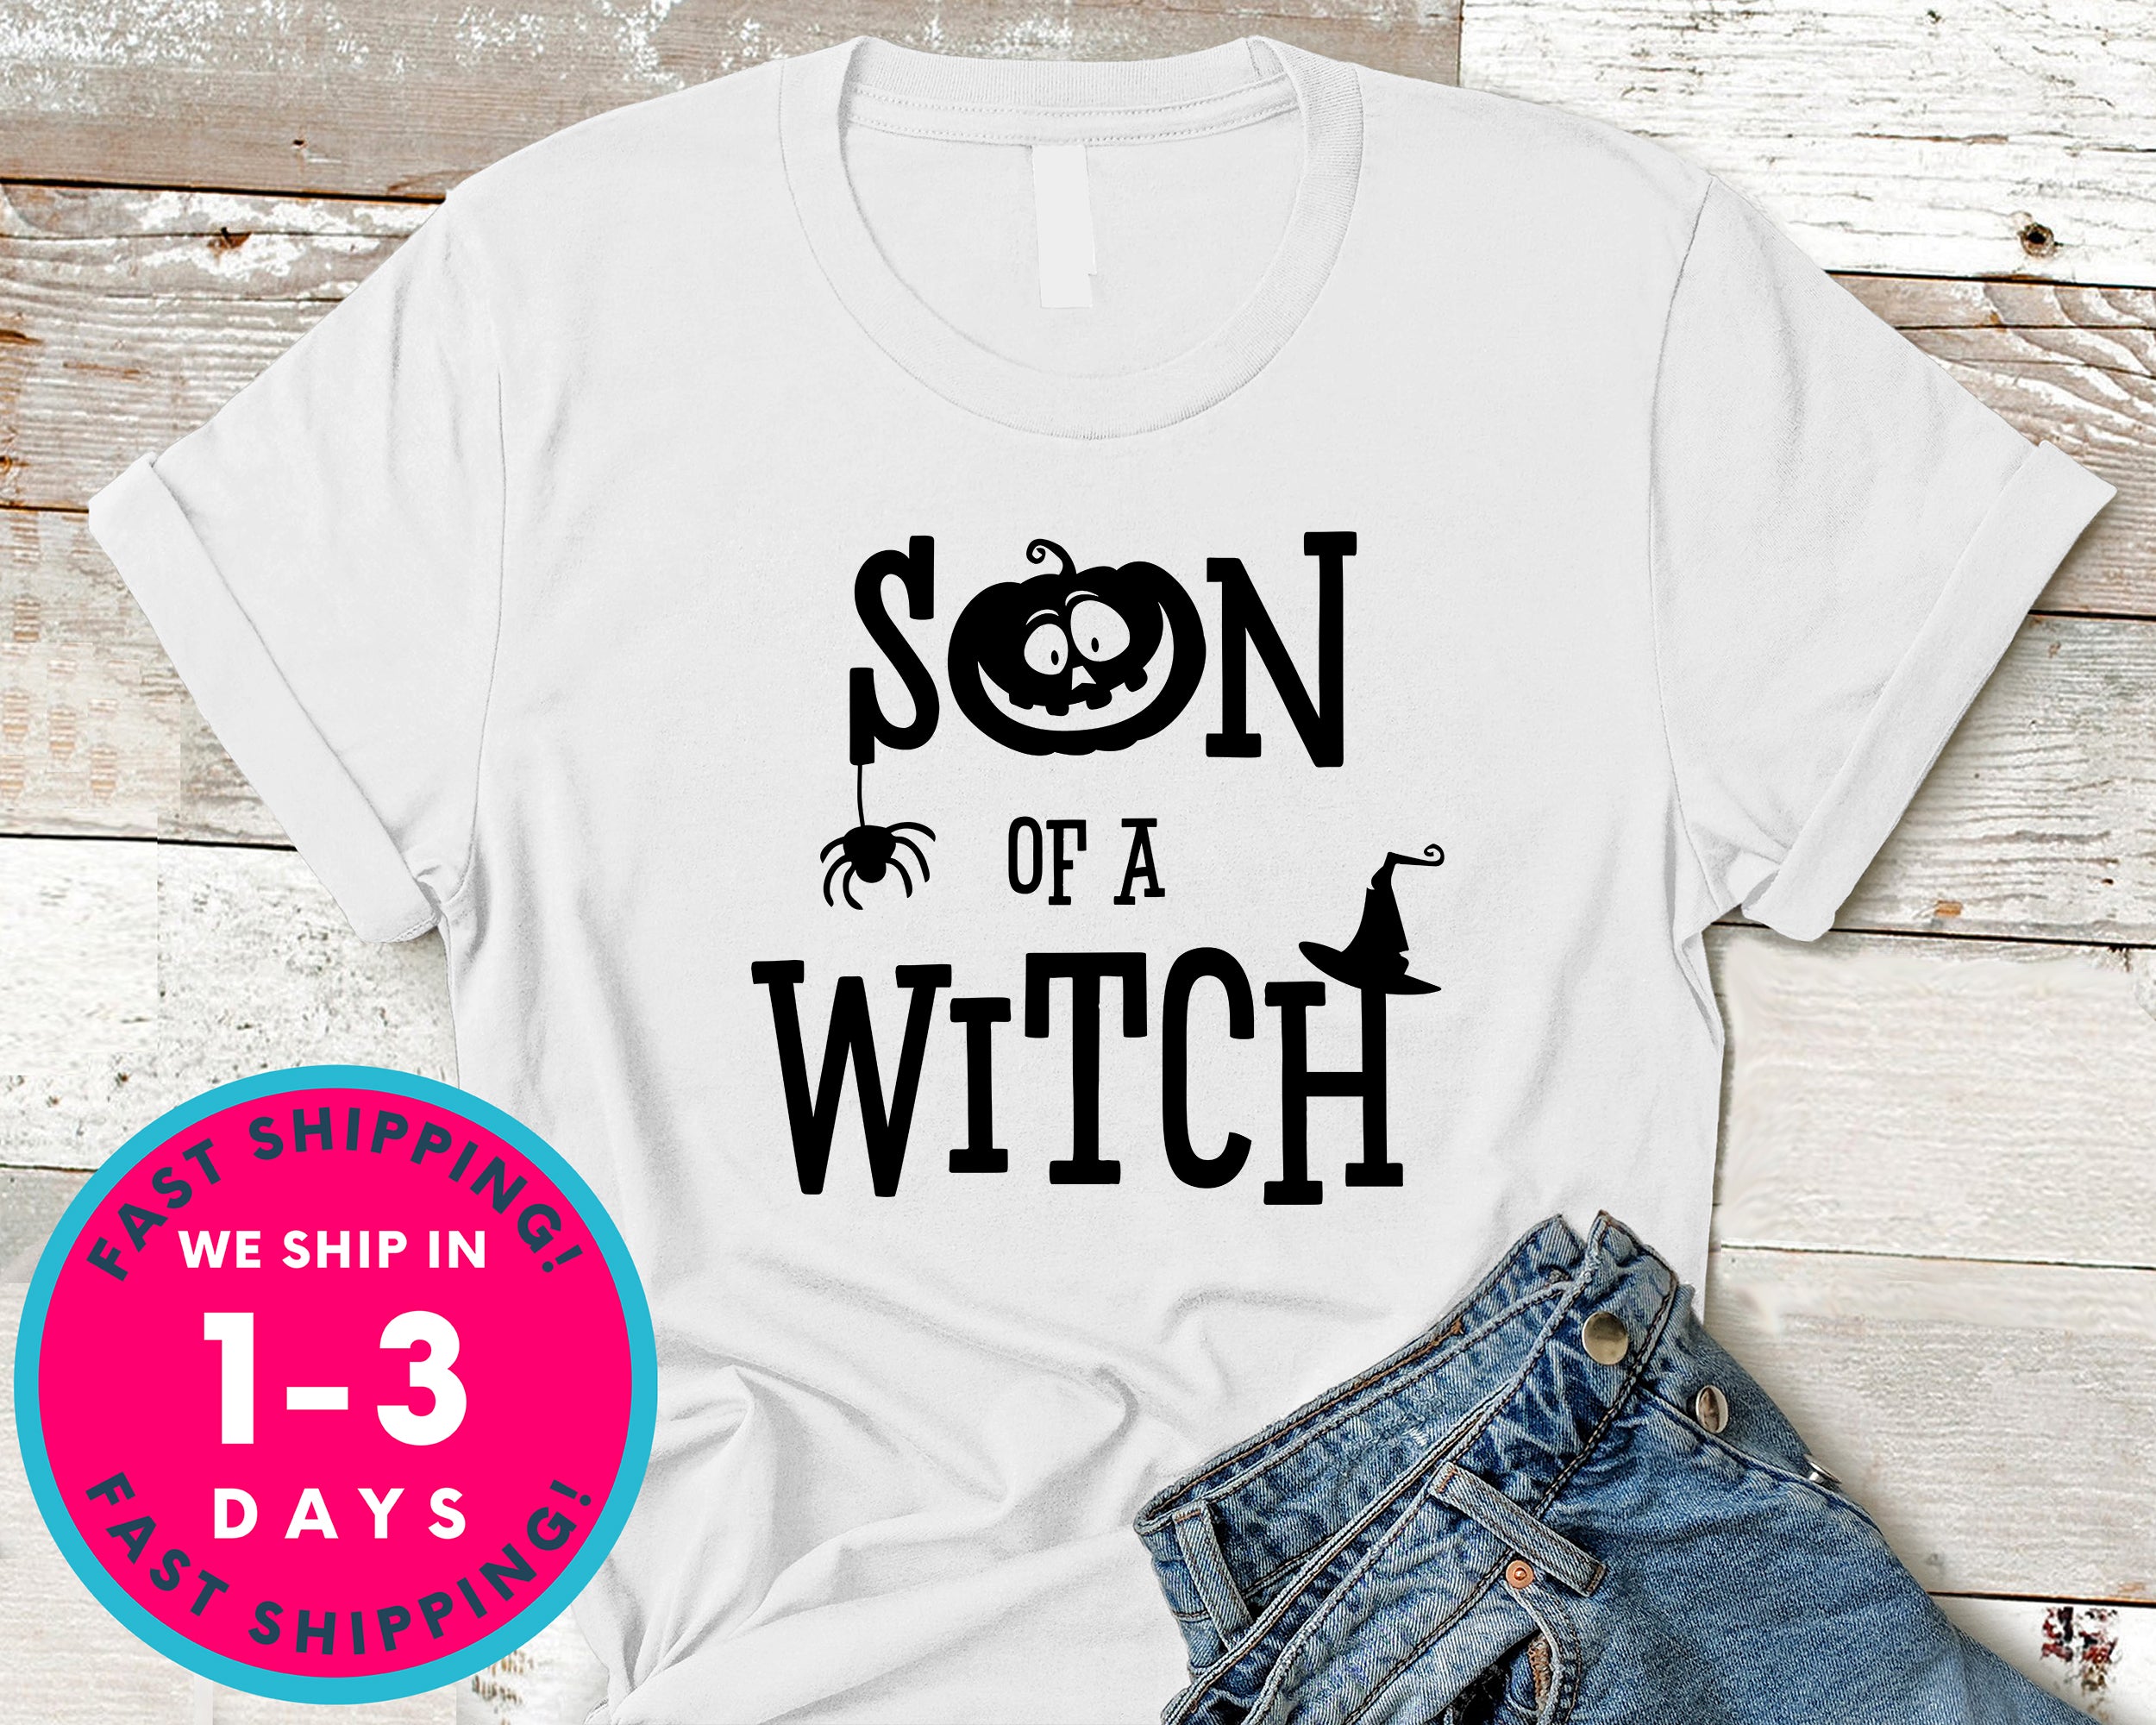 Son Of A Witch Shirt T-Shirt - Halloween Horror Scary Shirt